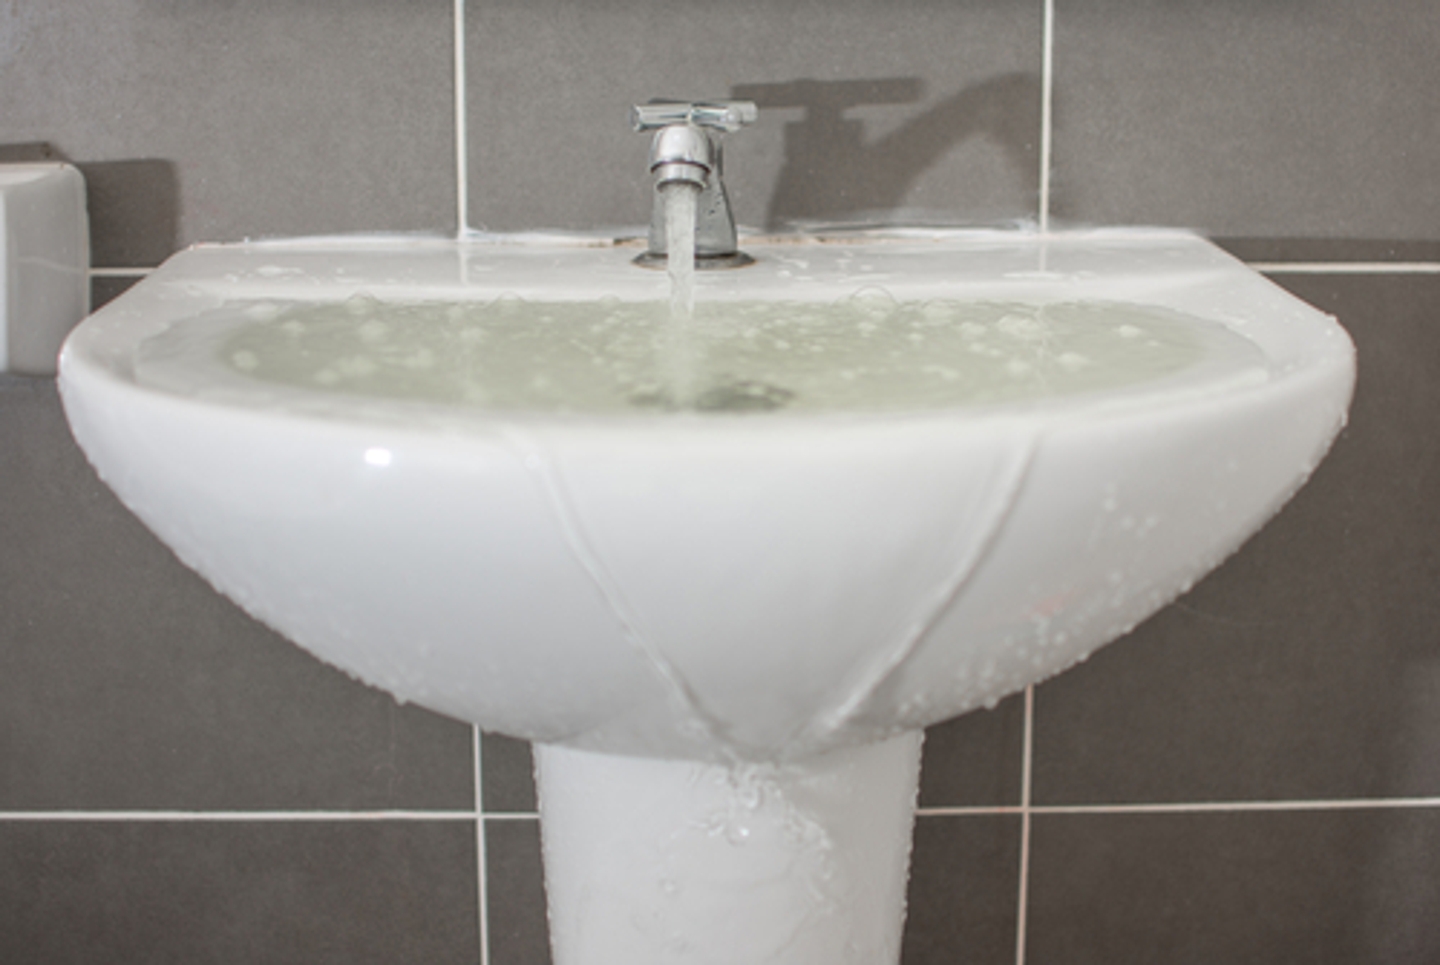 A sink overflowing with water in a bathroom. Insurance companies classify water damage into three categories. If you suffer category 1 water damage, category 2 water damage, or category 3 water damage, call SERVPRO. 